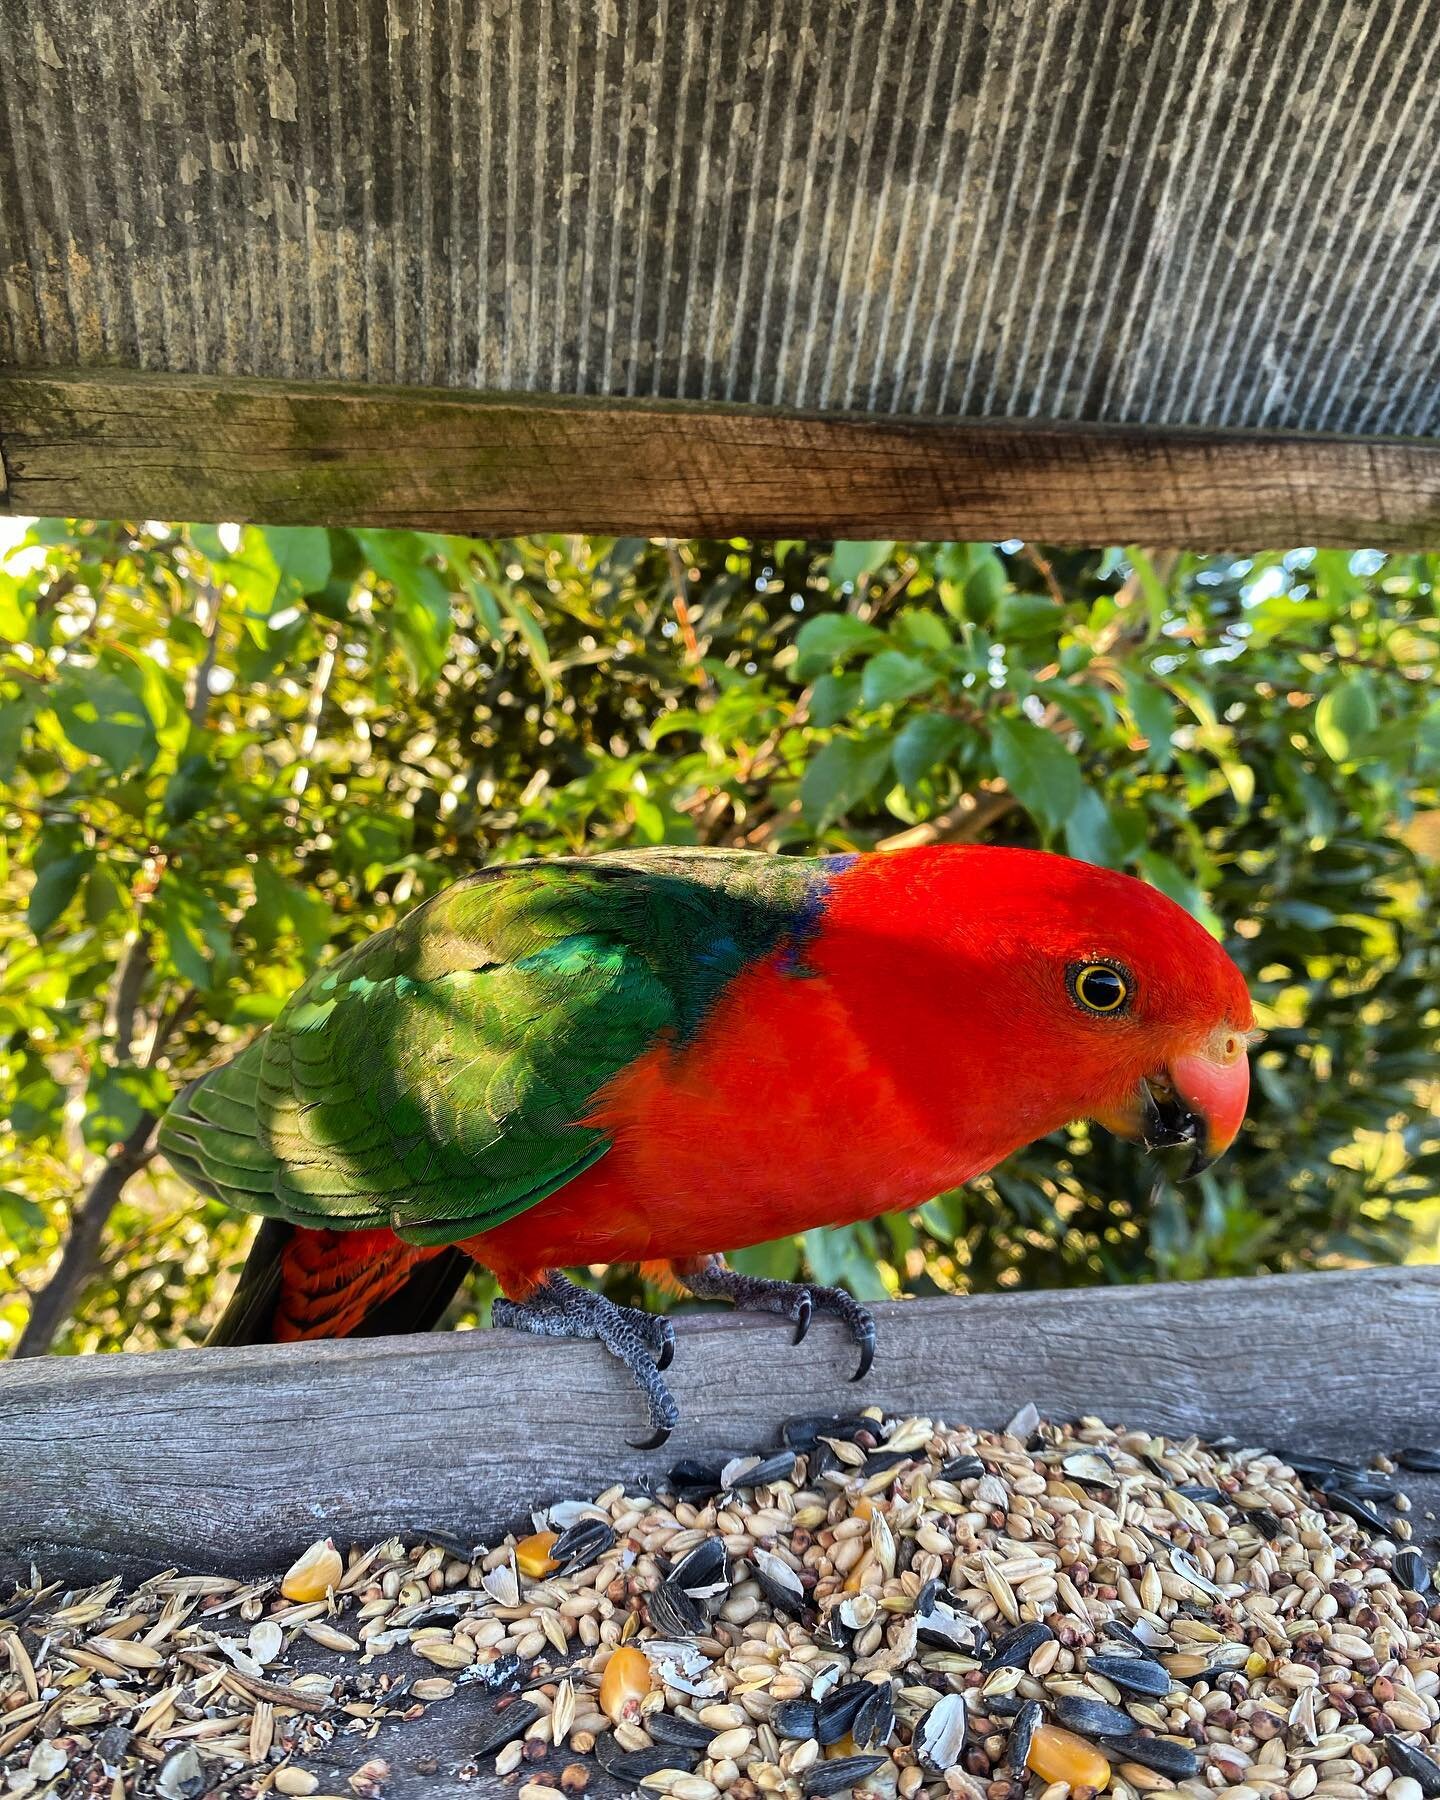 We absolutely love the bird life on our farm! This is Kingy, the kids have been super excited for his daily visits. They have been really patient and gentle and have been rewarded with his trust. Kingy now likes to feed from their hand. #kingparrot